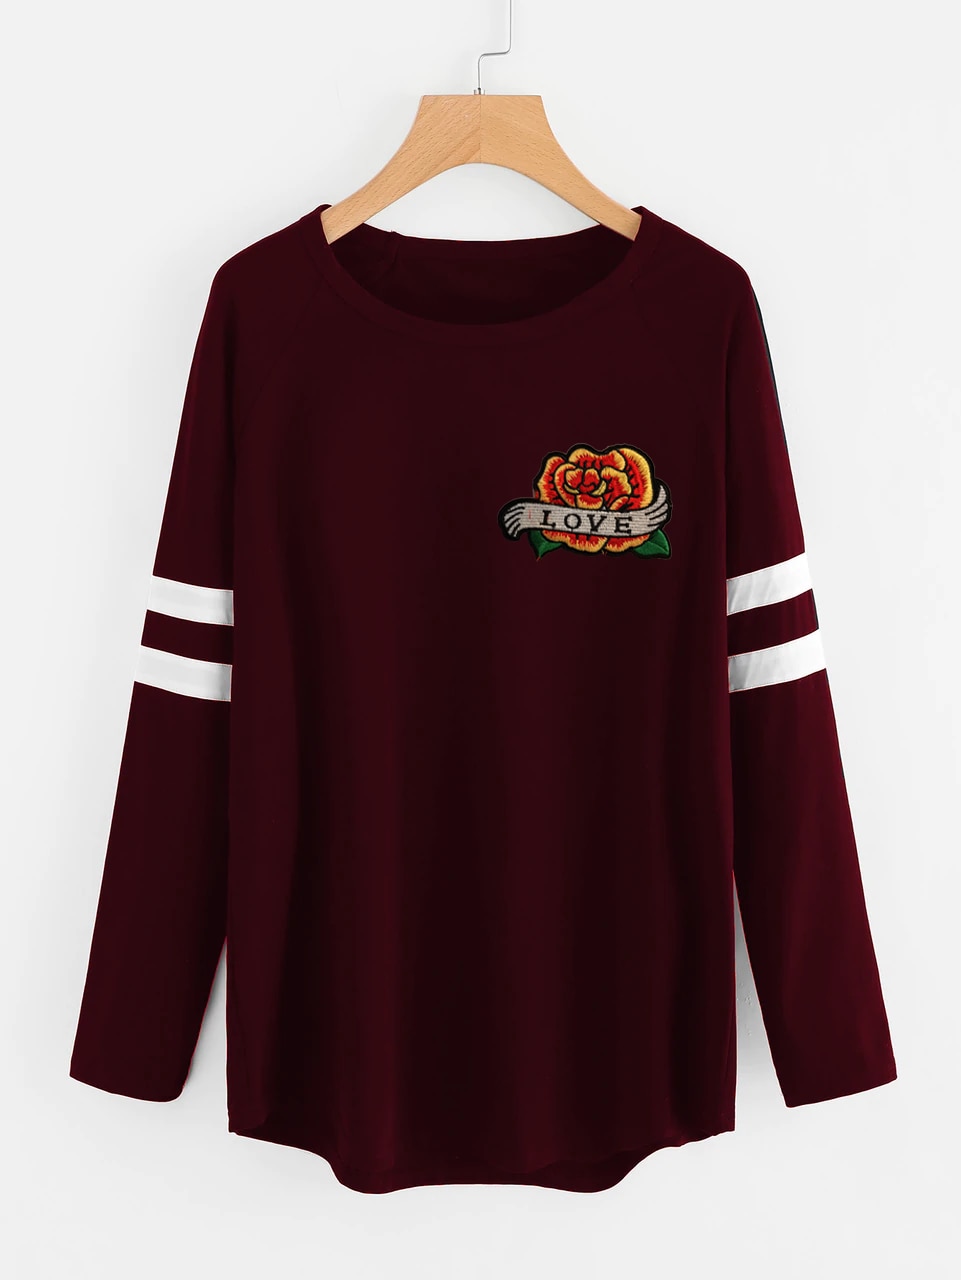 /2019/06/fifth-avenue-womens-naza-full-sleeves-embroidered-ripzt30-t-shirt-maroon-image1.jpeg